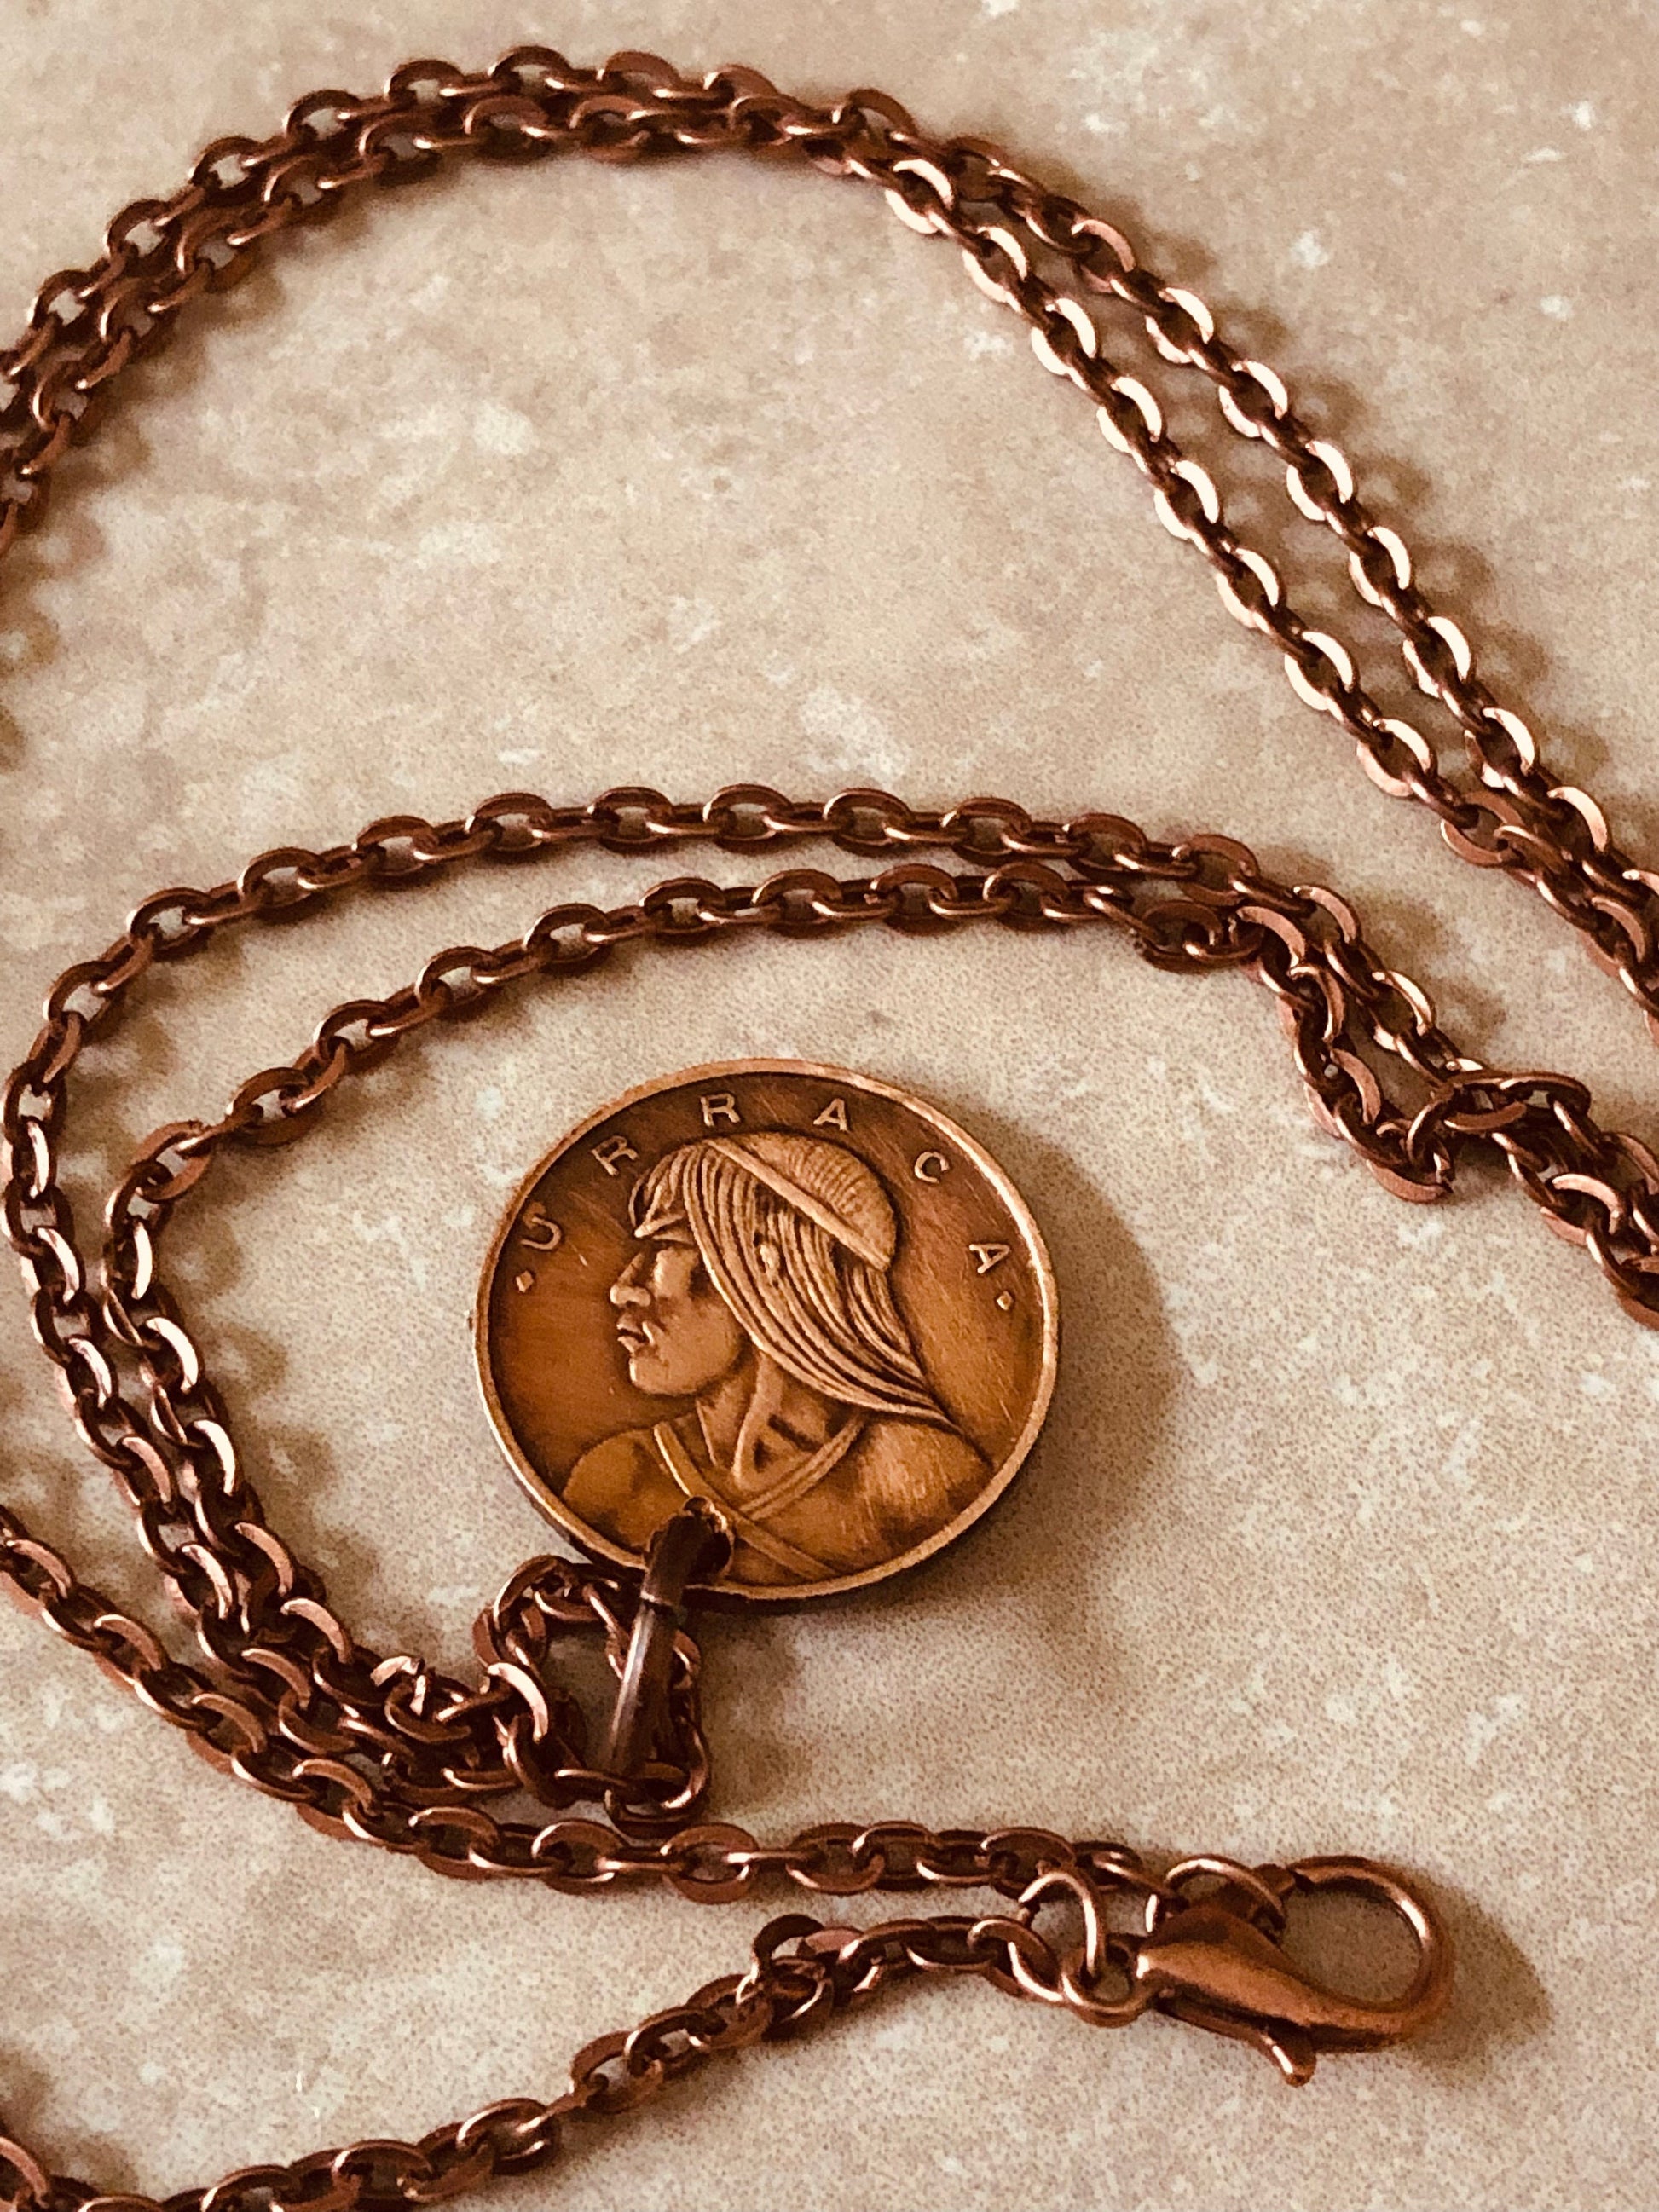 Panama Coin Pendant One Centesimo Panamanian Necklace Custom Charm Gift For Friend Coin Charm Gift For Him, Her, Coin Collector, World Coins